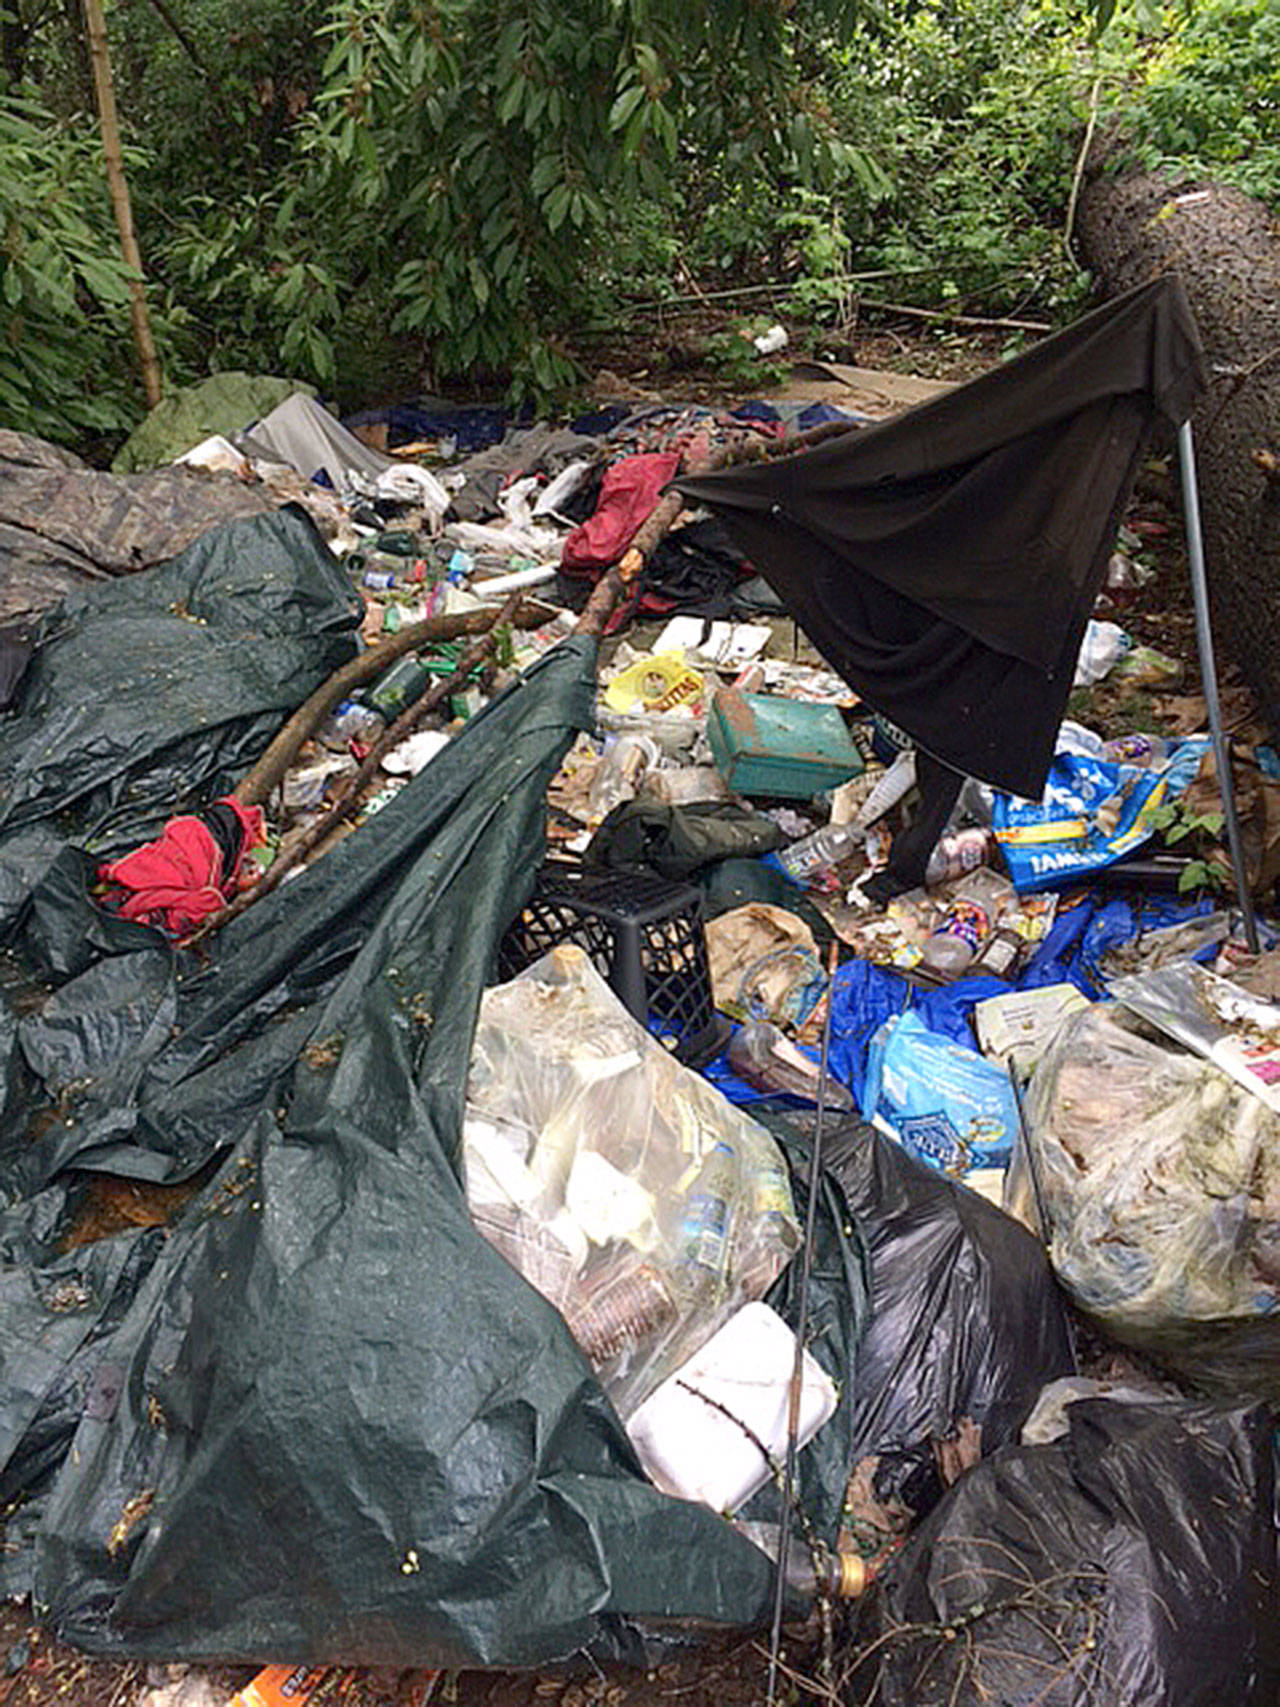 Trash from an encampment in Bellevue. Photo courtesy of Bellevue Police Department